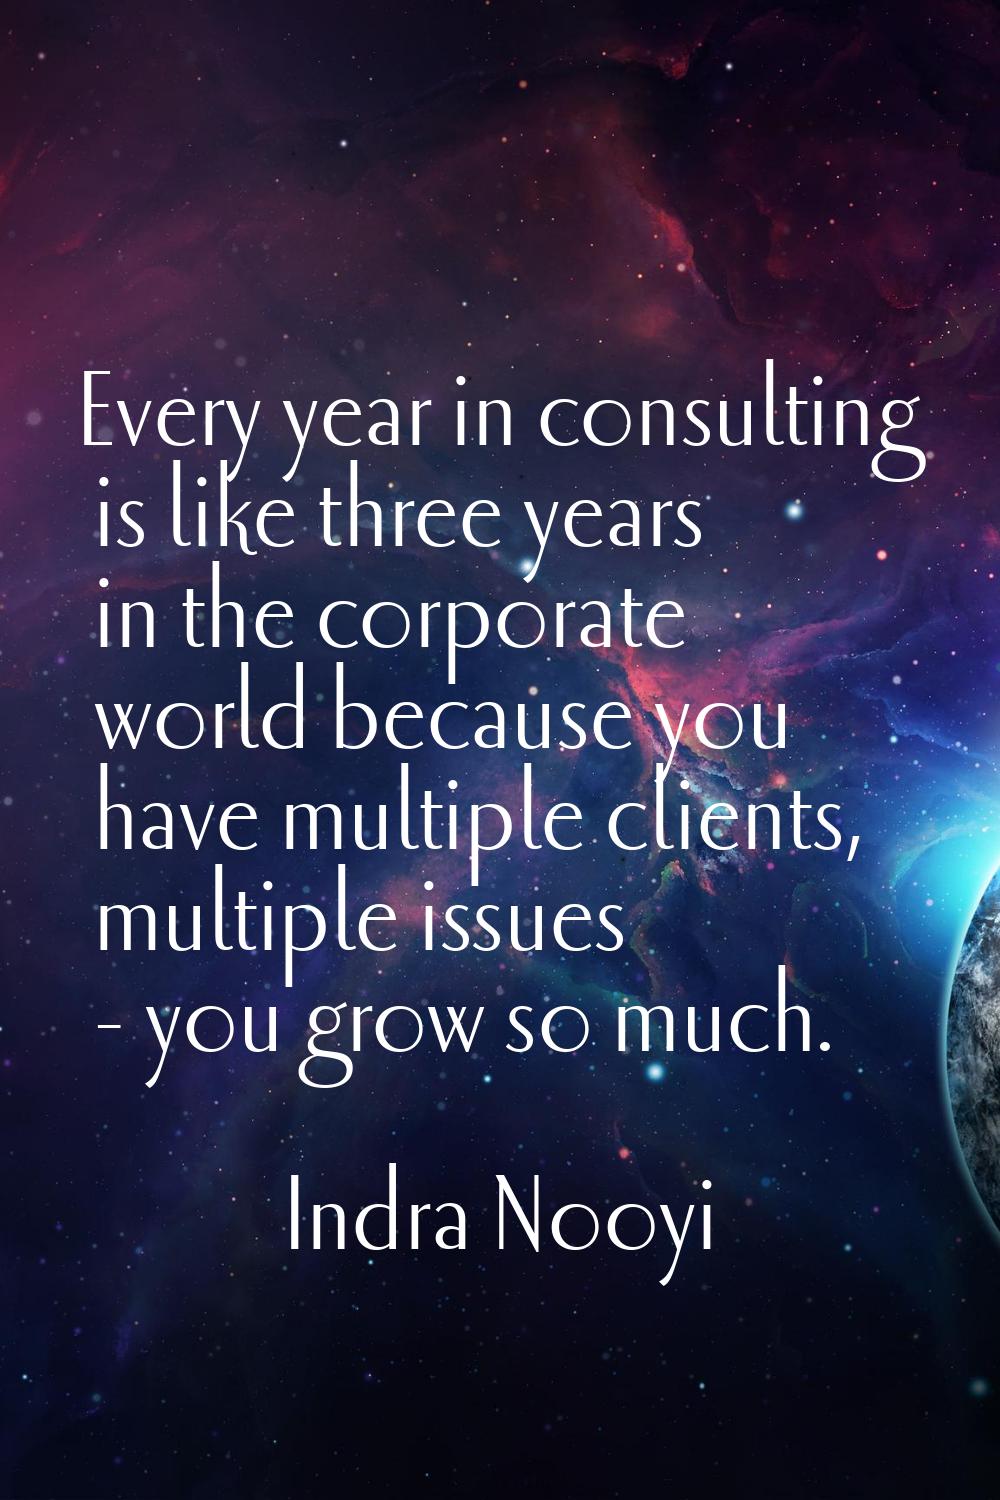 Every year in consulting is like three years in the corporate world because you have multiple clien